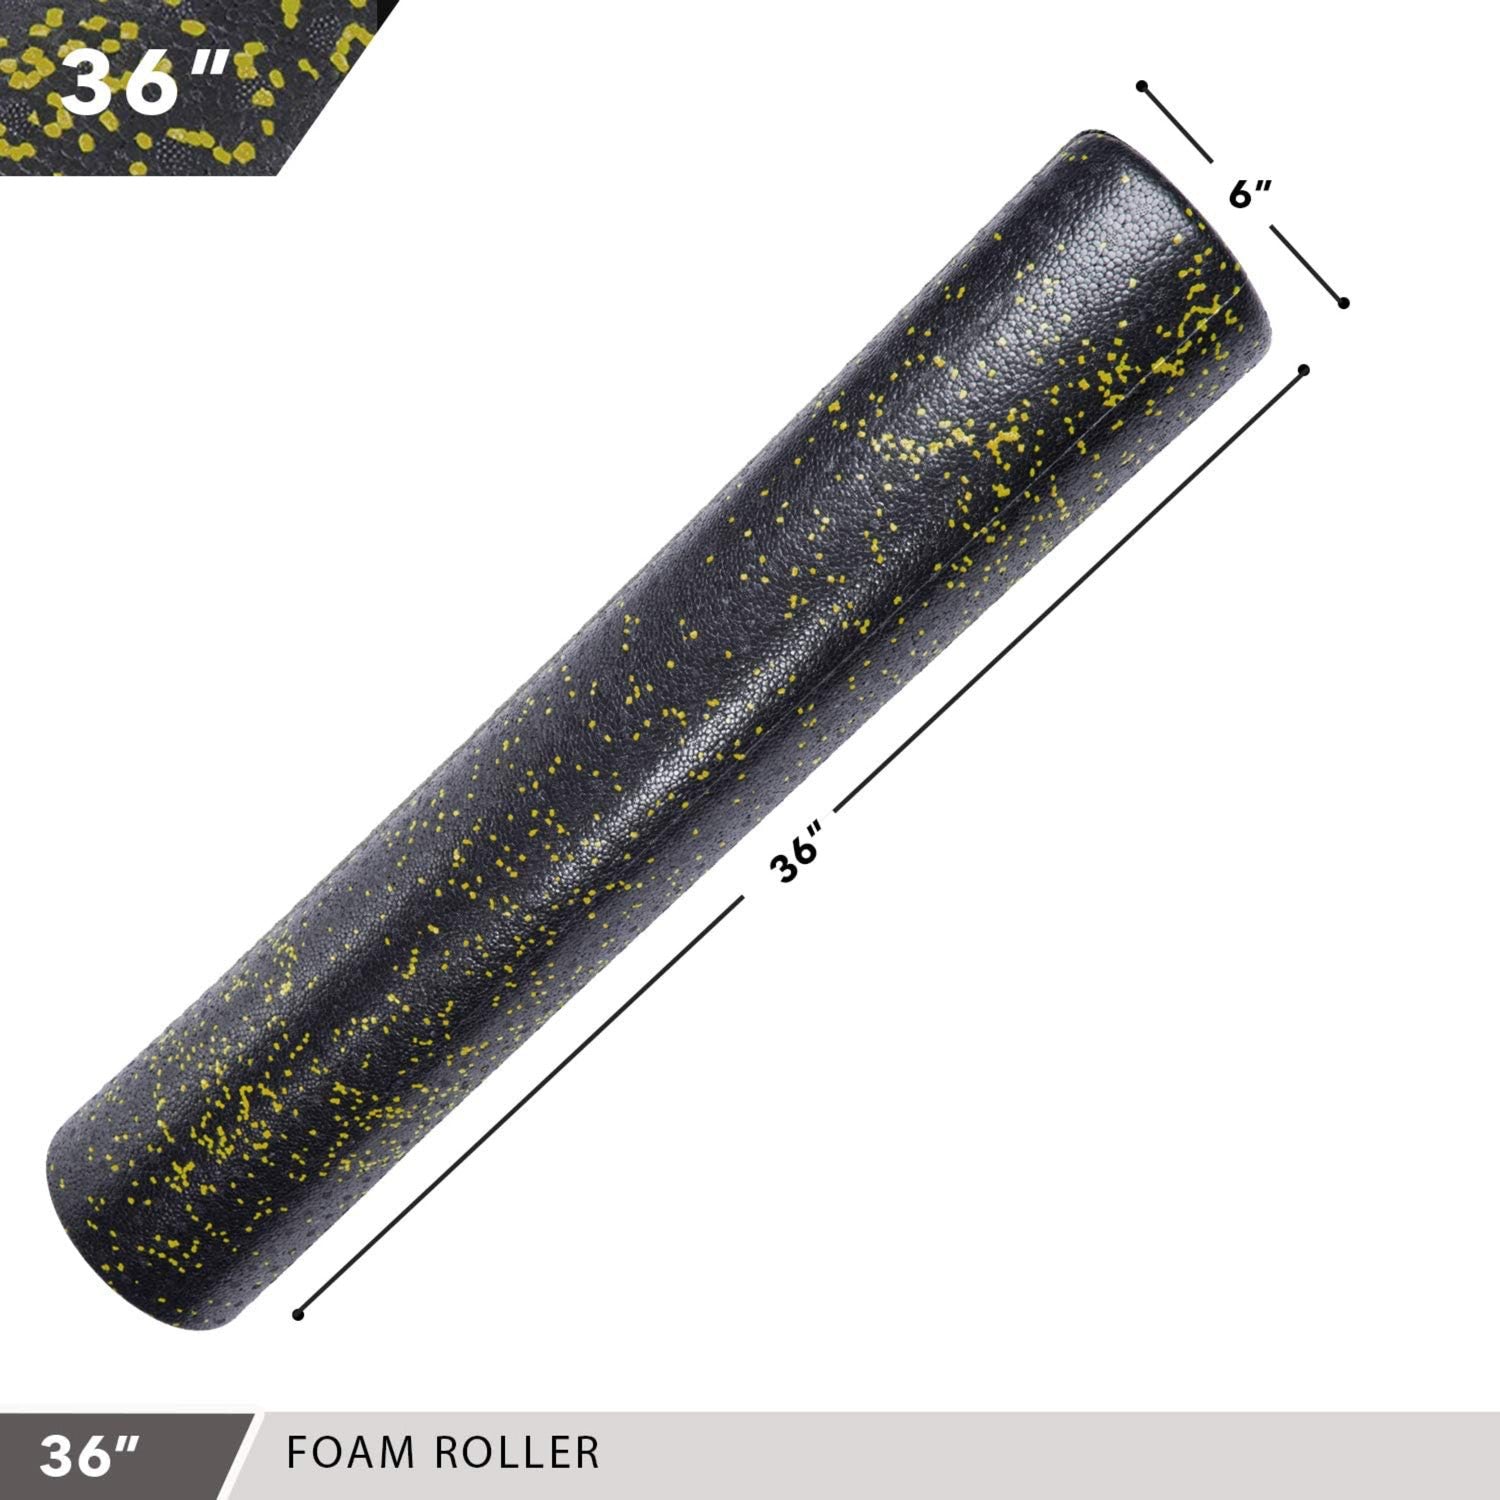 High-Density Foam Roller 36" Speckled Yellow Day 1 Fitness